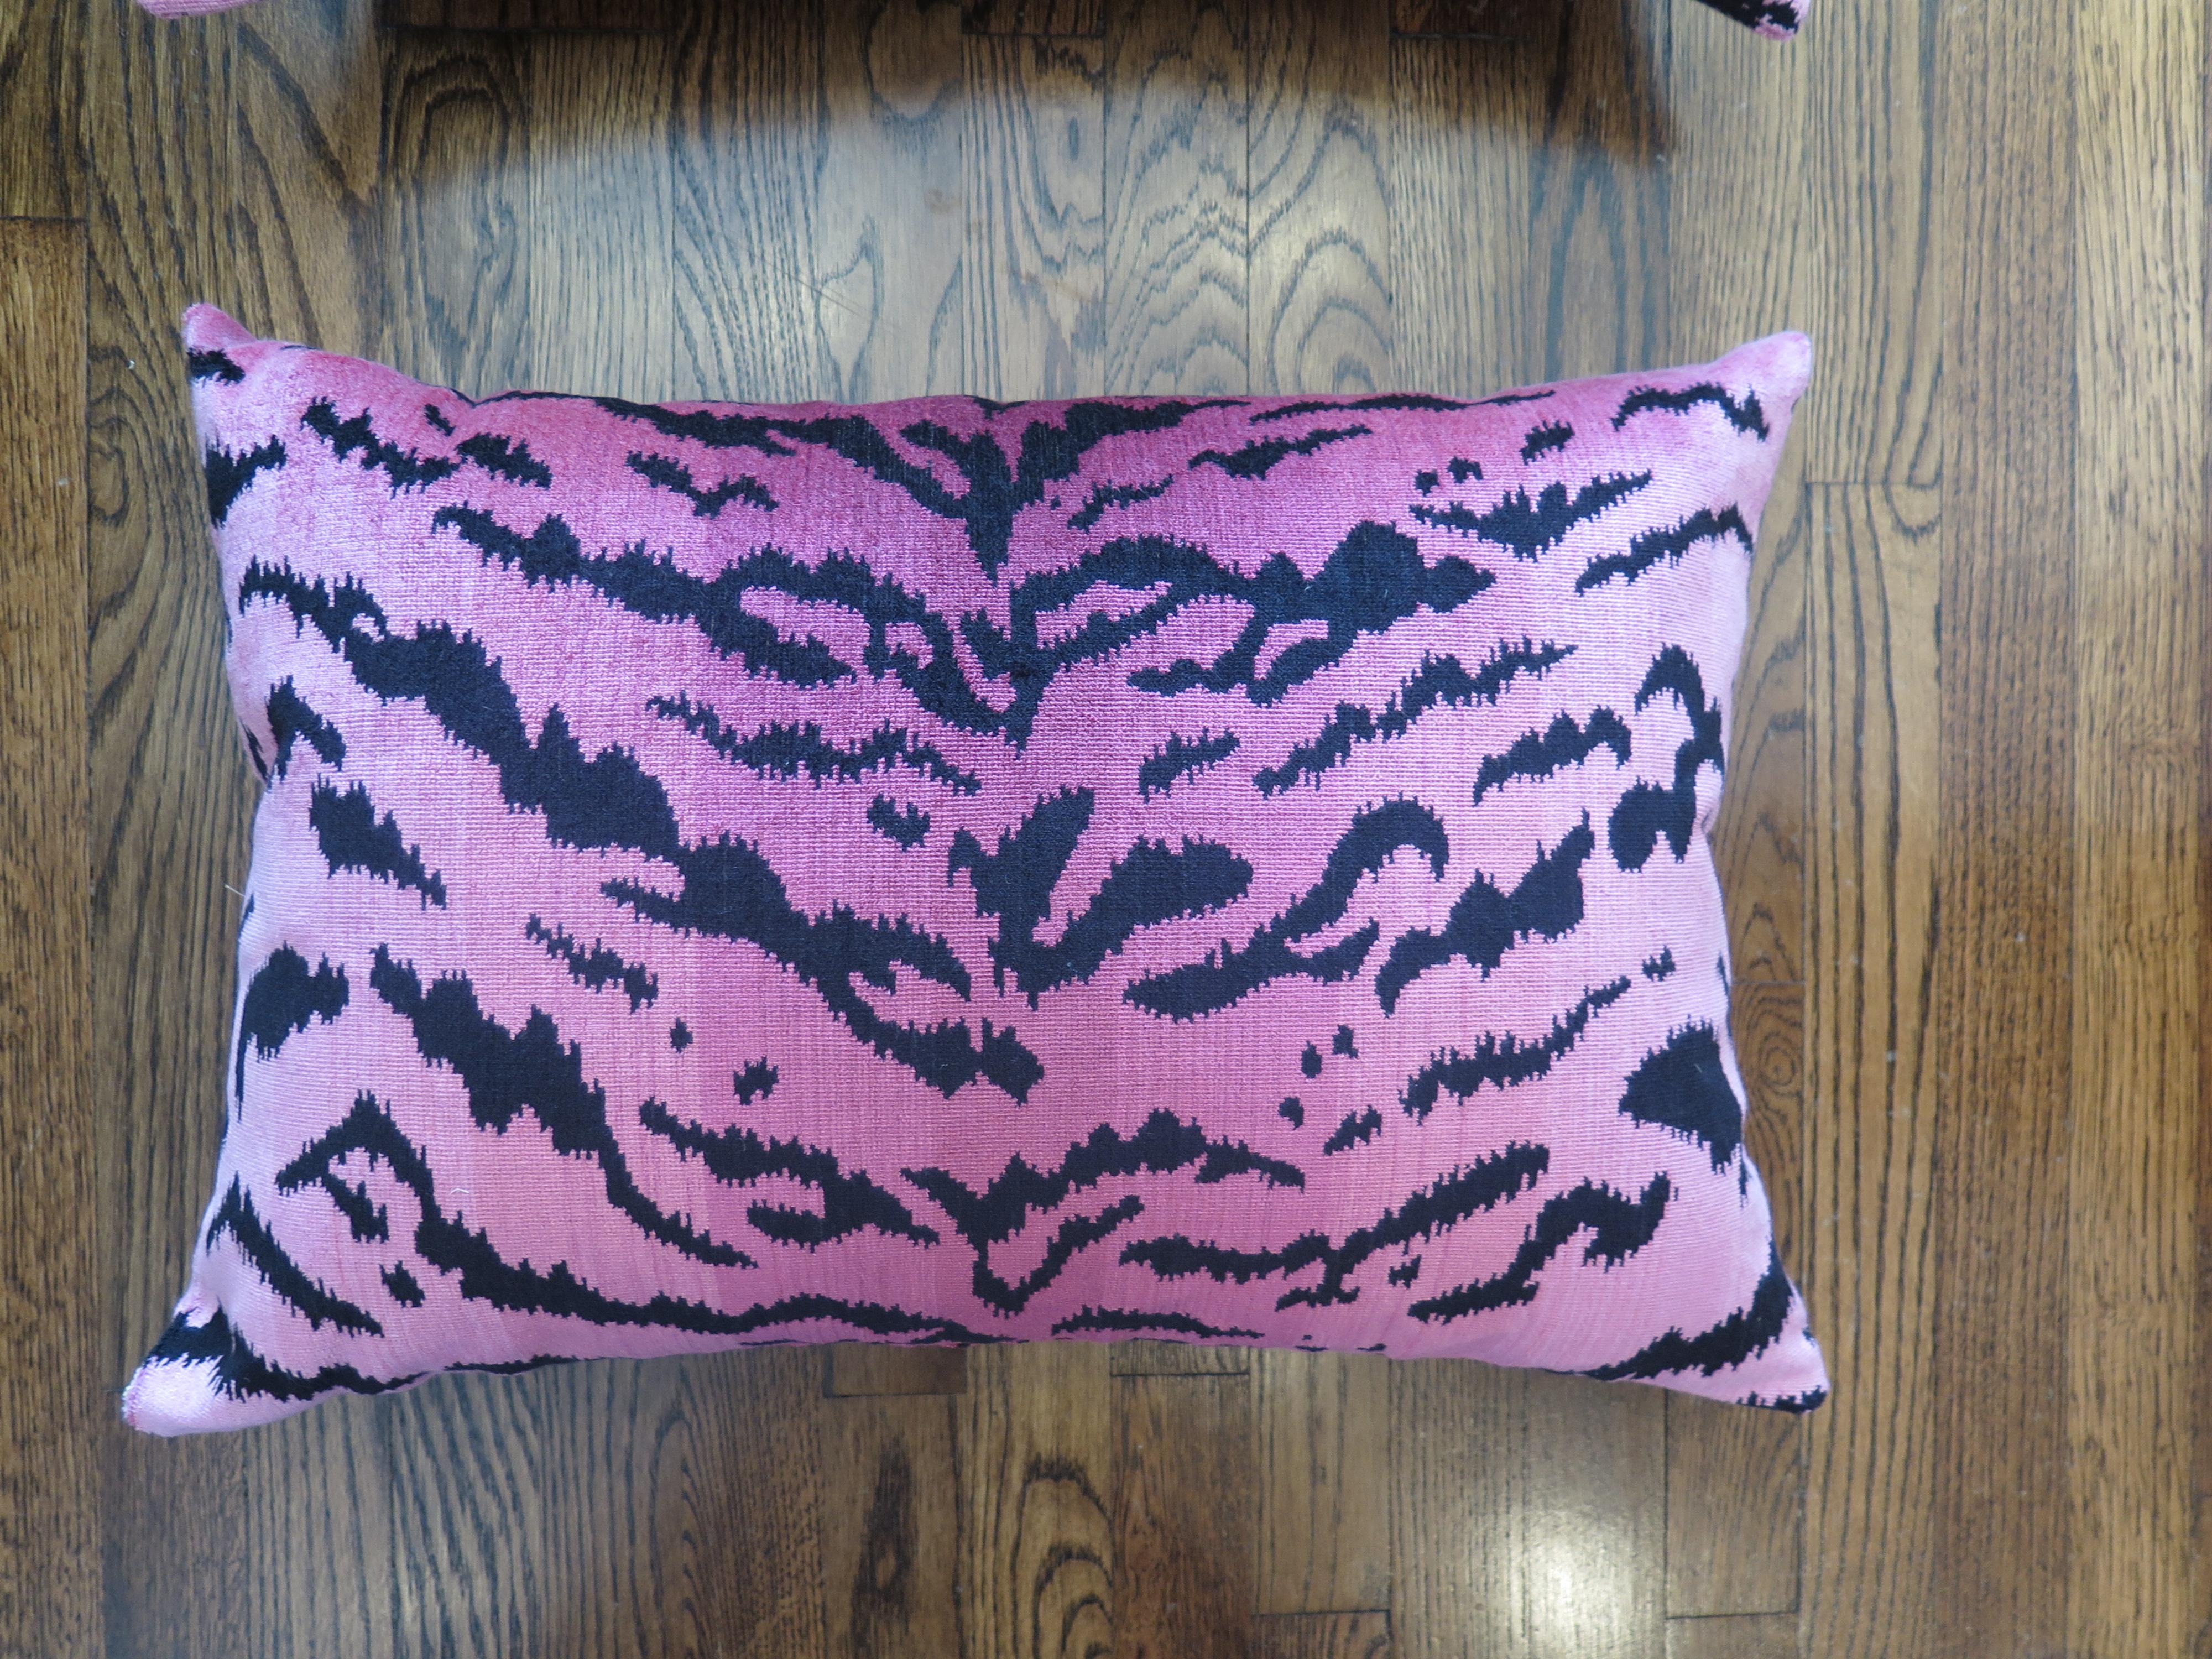 Scalamandré Le Tigre silk velvet pillows made-to-order custom pillows. The price listed is per pillow. We currently have the pair in the picture available, but we can make more in a 4-6 week lead time once these sell. We can make any size or with